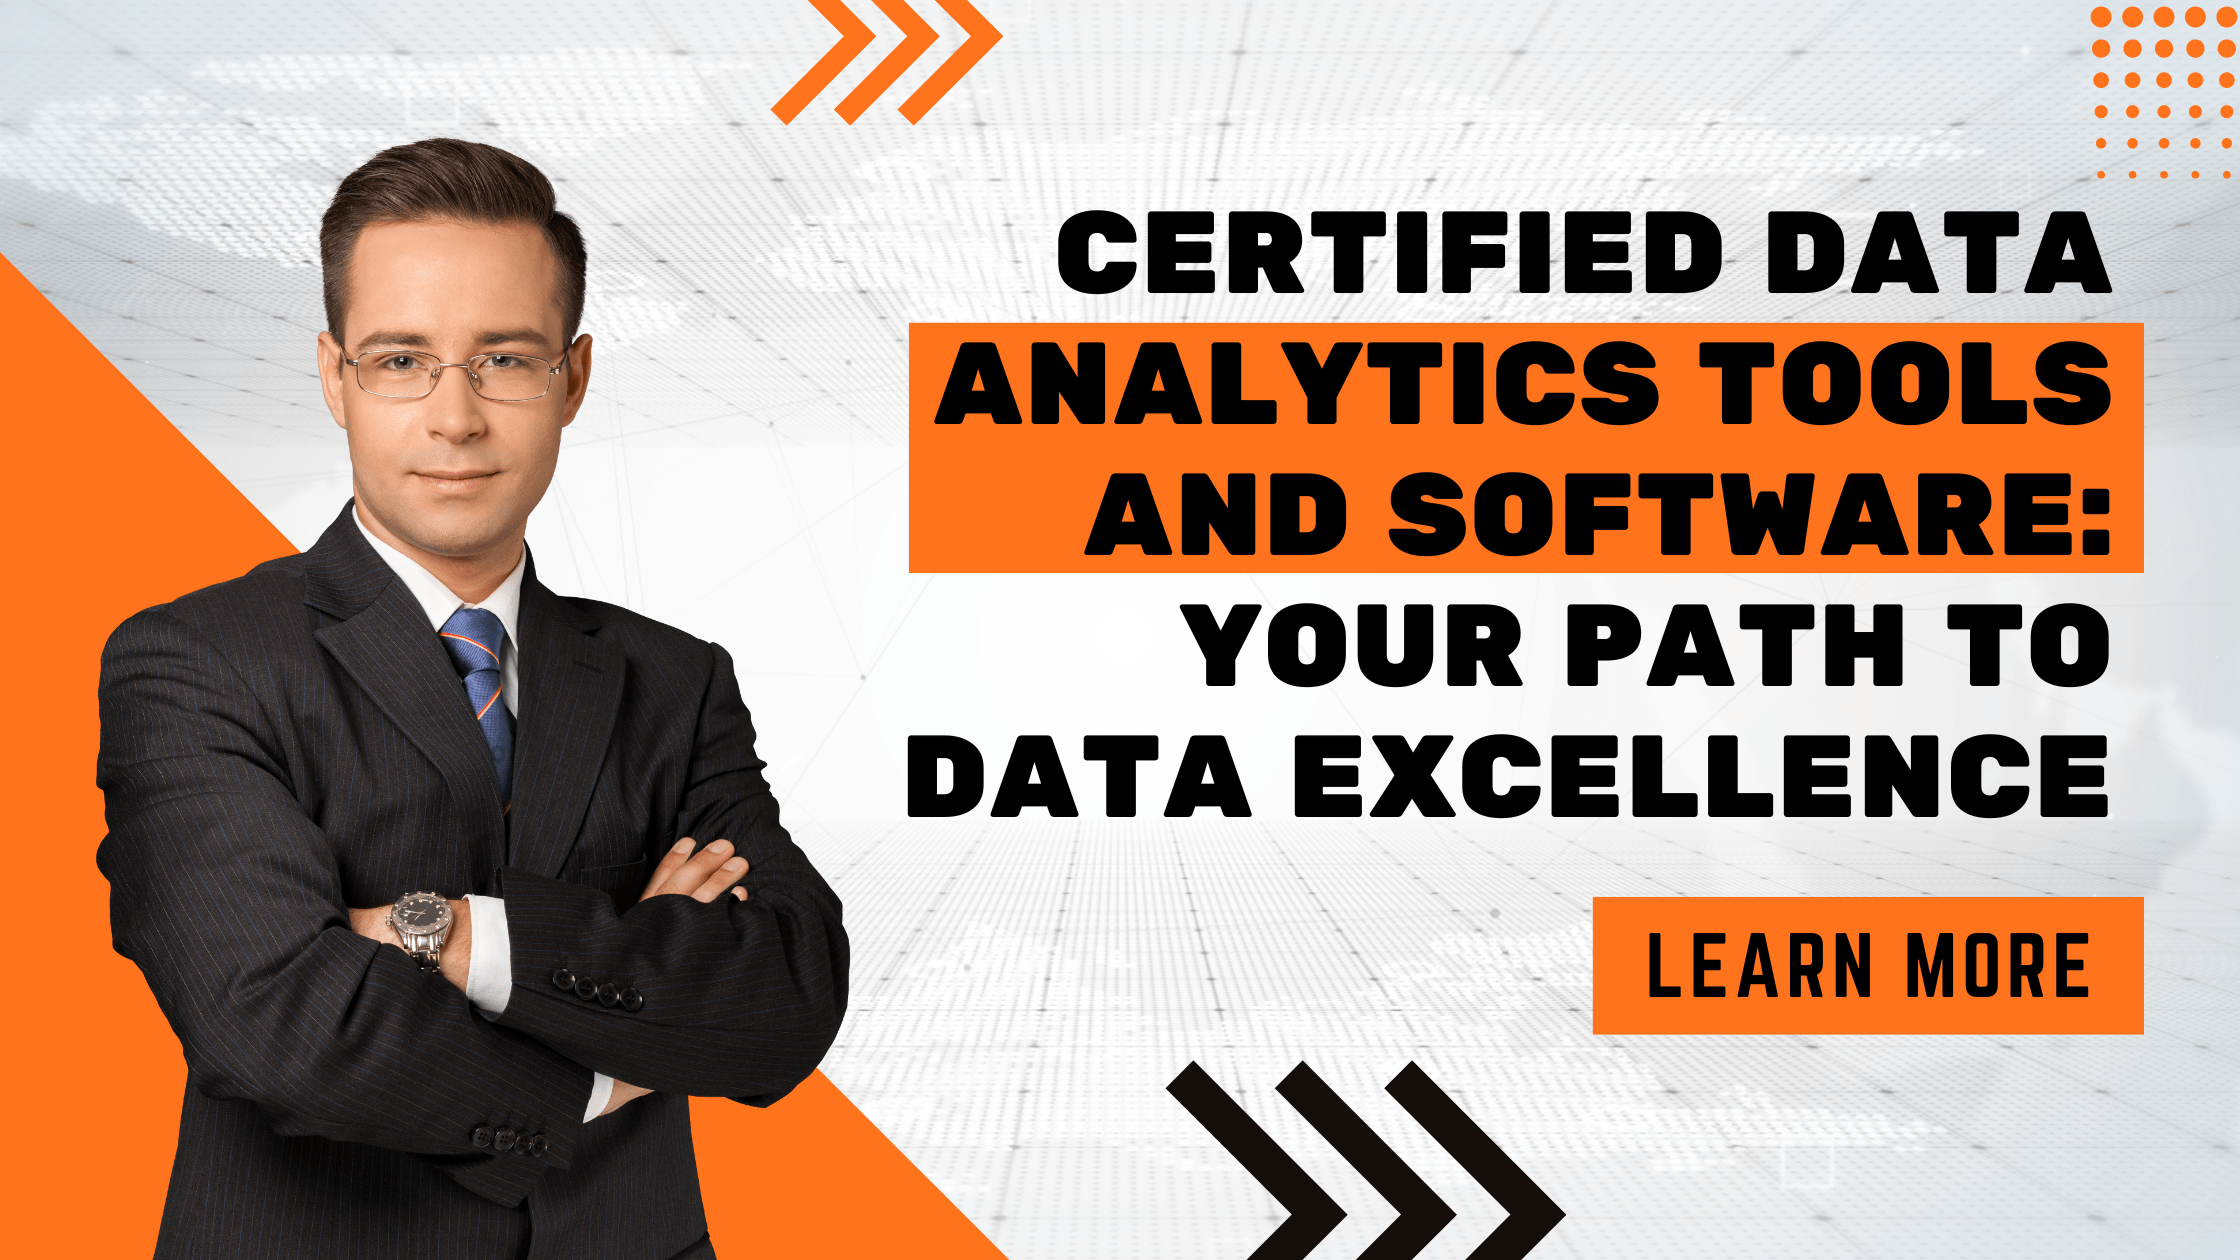 Certified Data Analytics Tools and Software: Your Path to Data Excellence